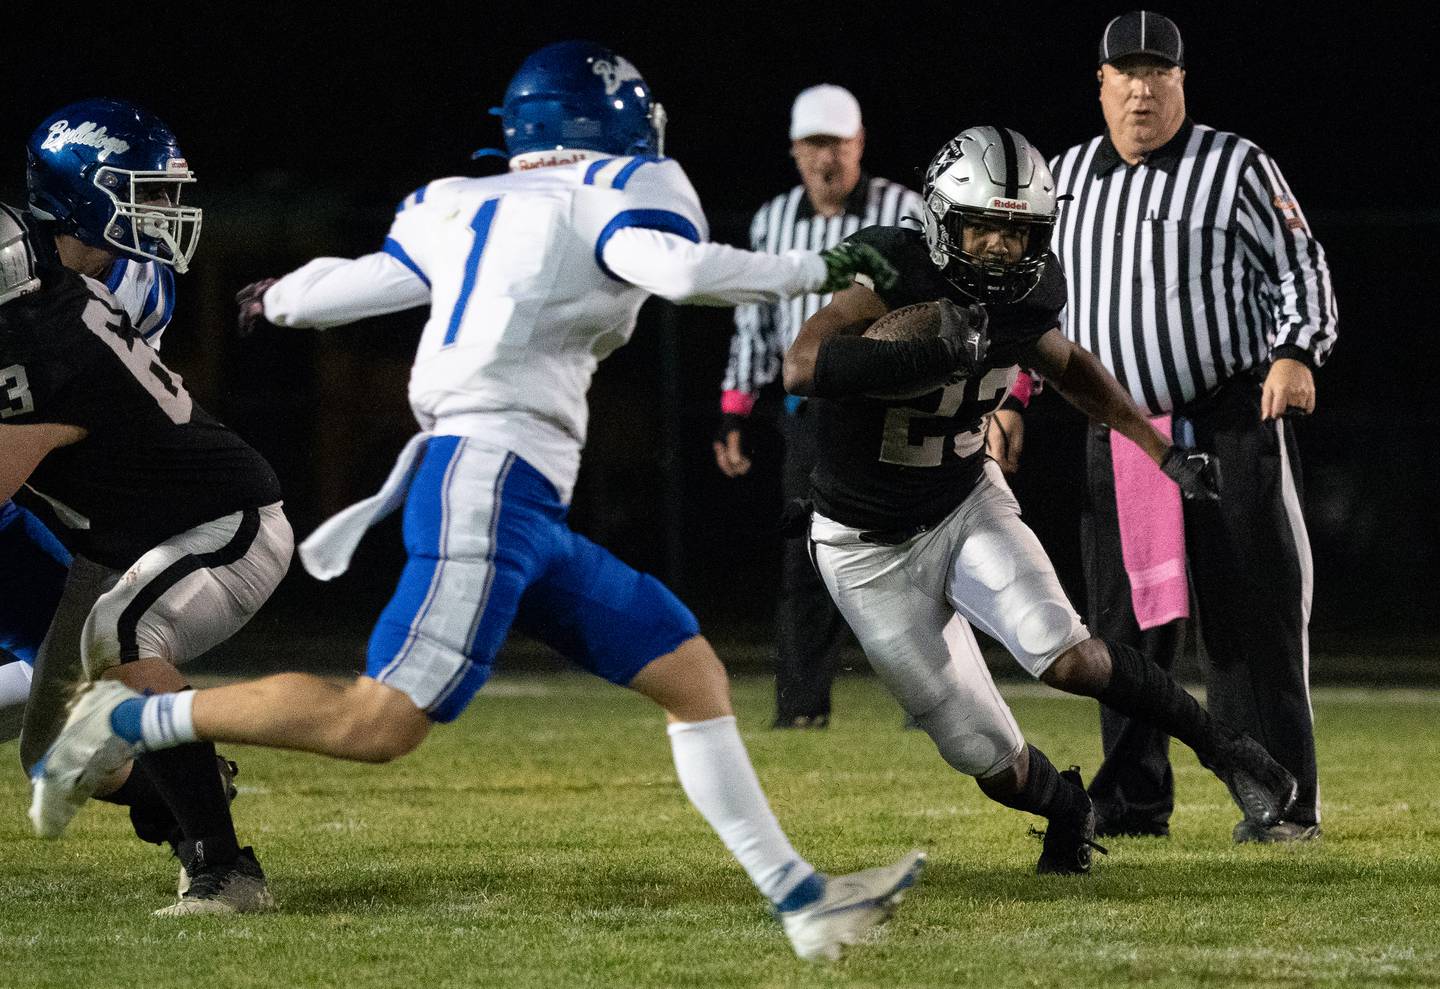 Kaneland’s Aric Johnson (23) carries the ball against Riverside Brookfield during a 6A playoff football game at Kaneland High School in Maple Park on Friday, Oct 28, 2022.\